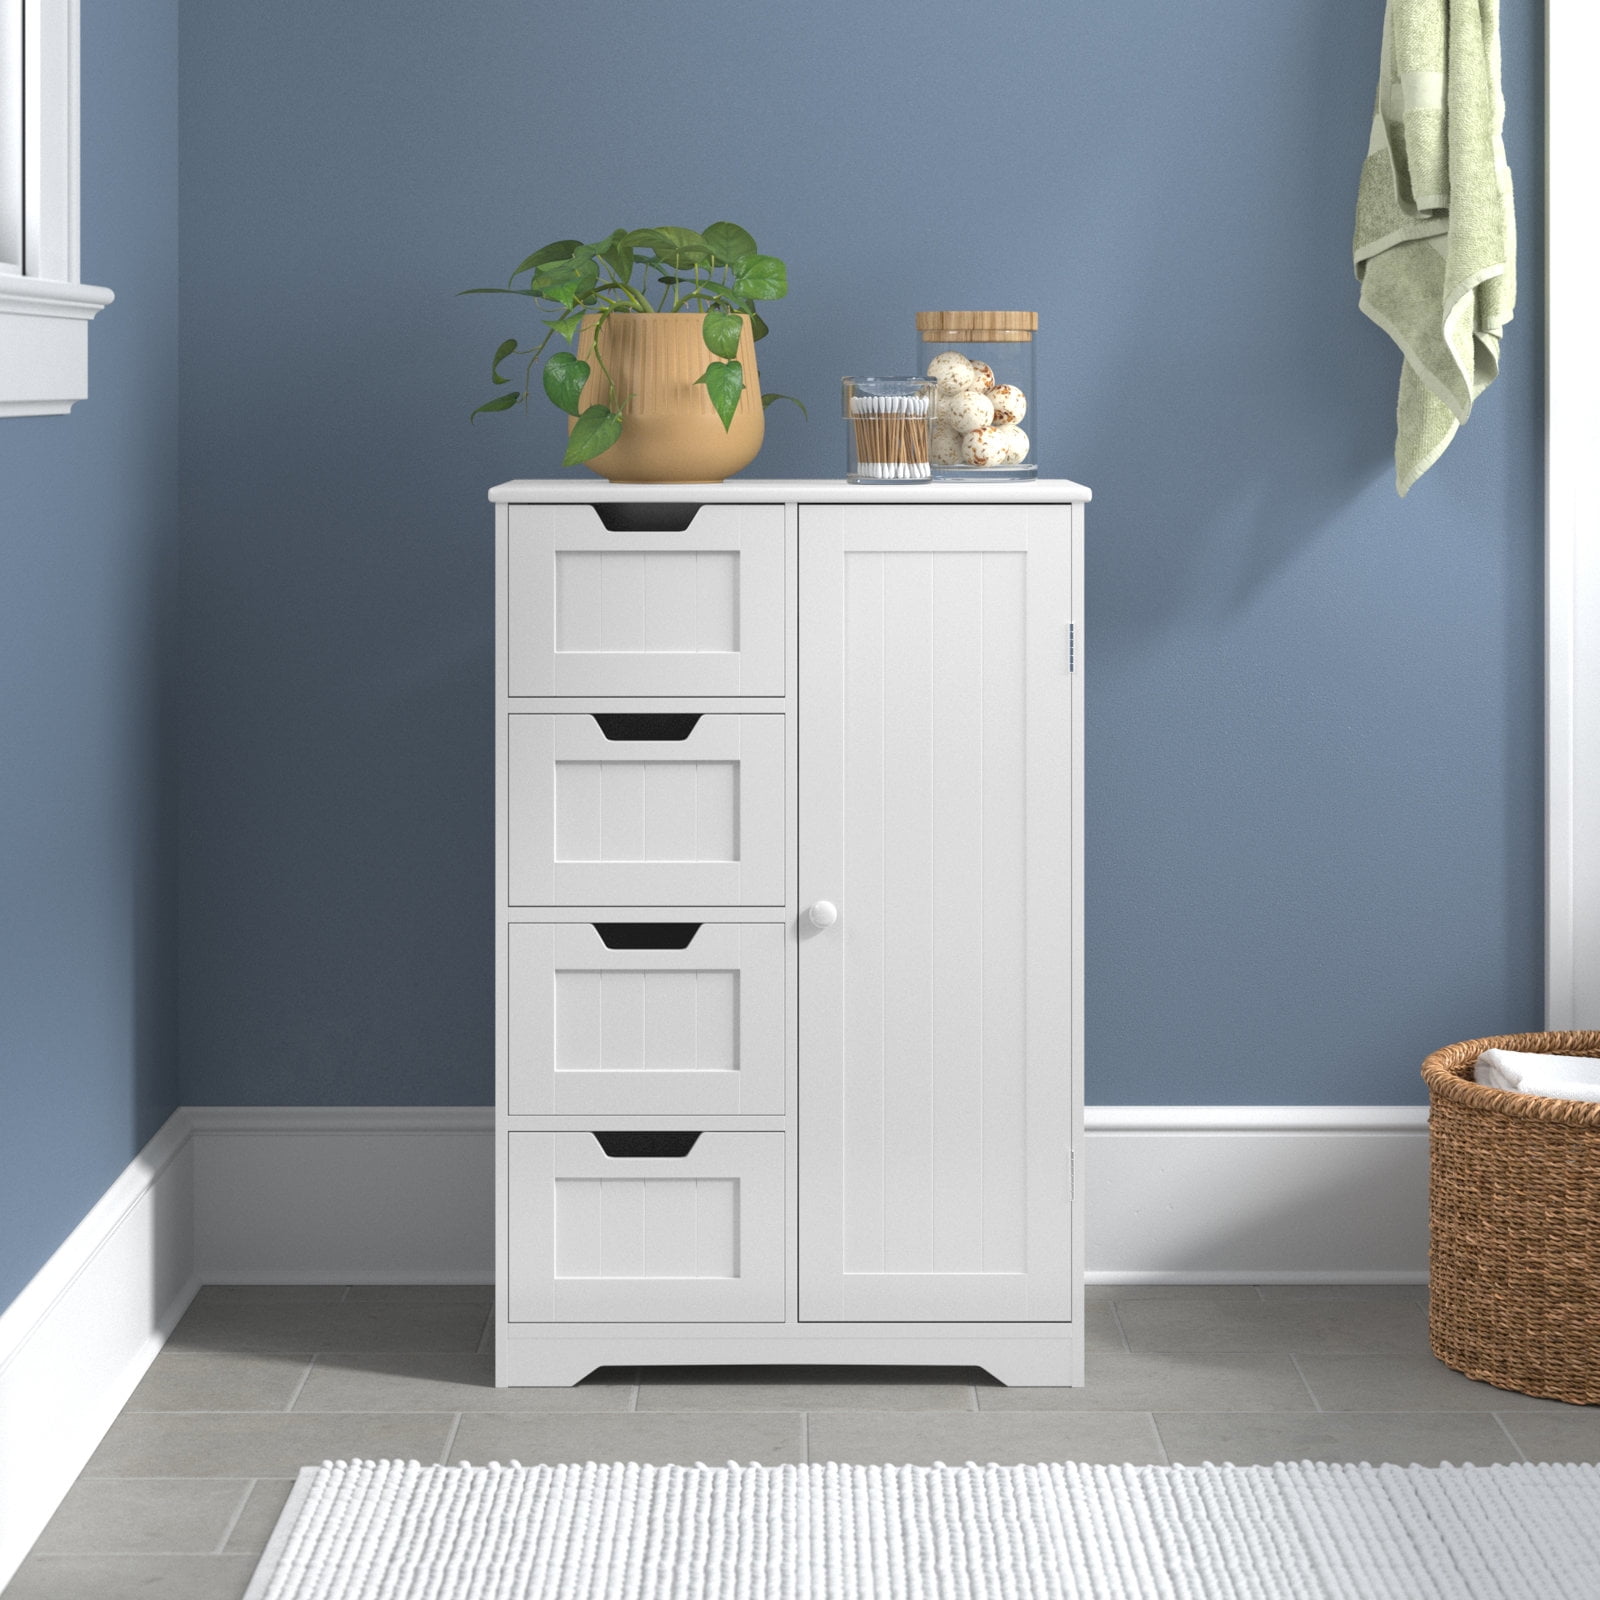 The 12 Inch Deep Upper Bathroom Cabinet - Include One In Your Next